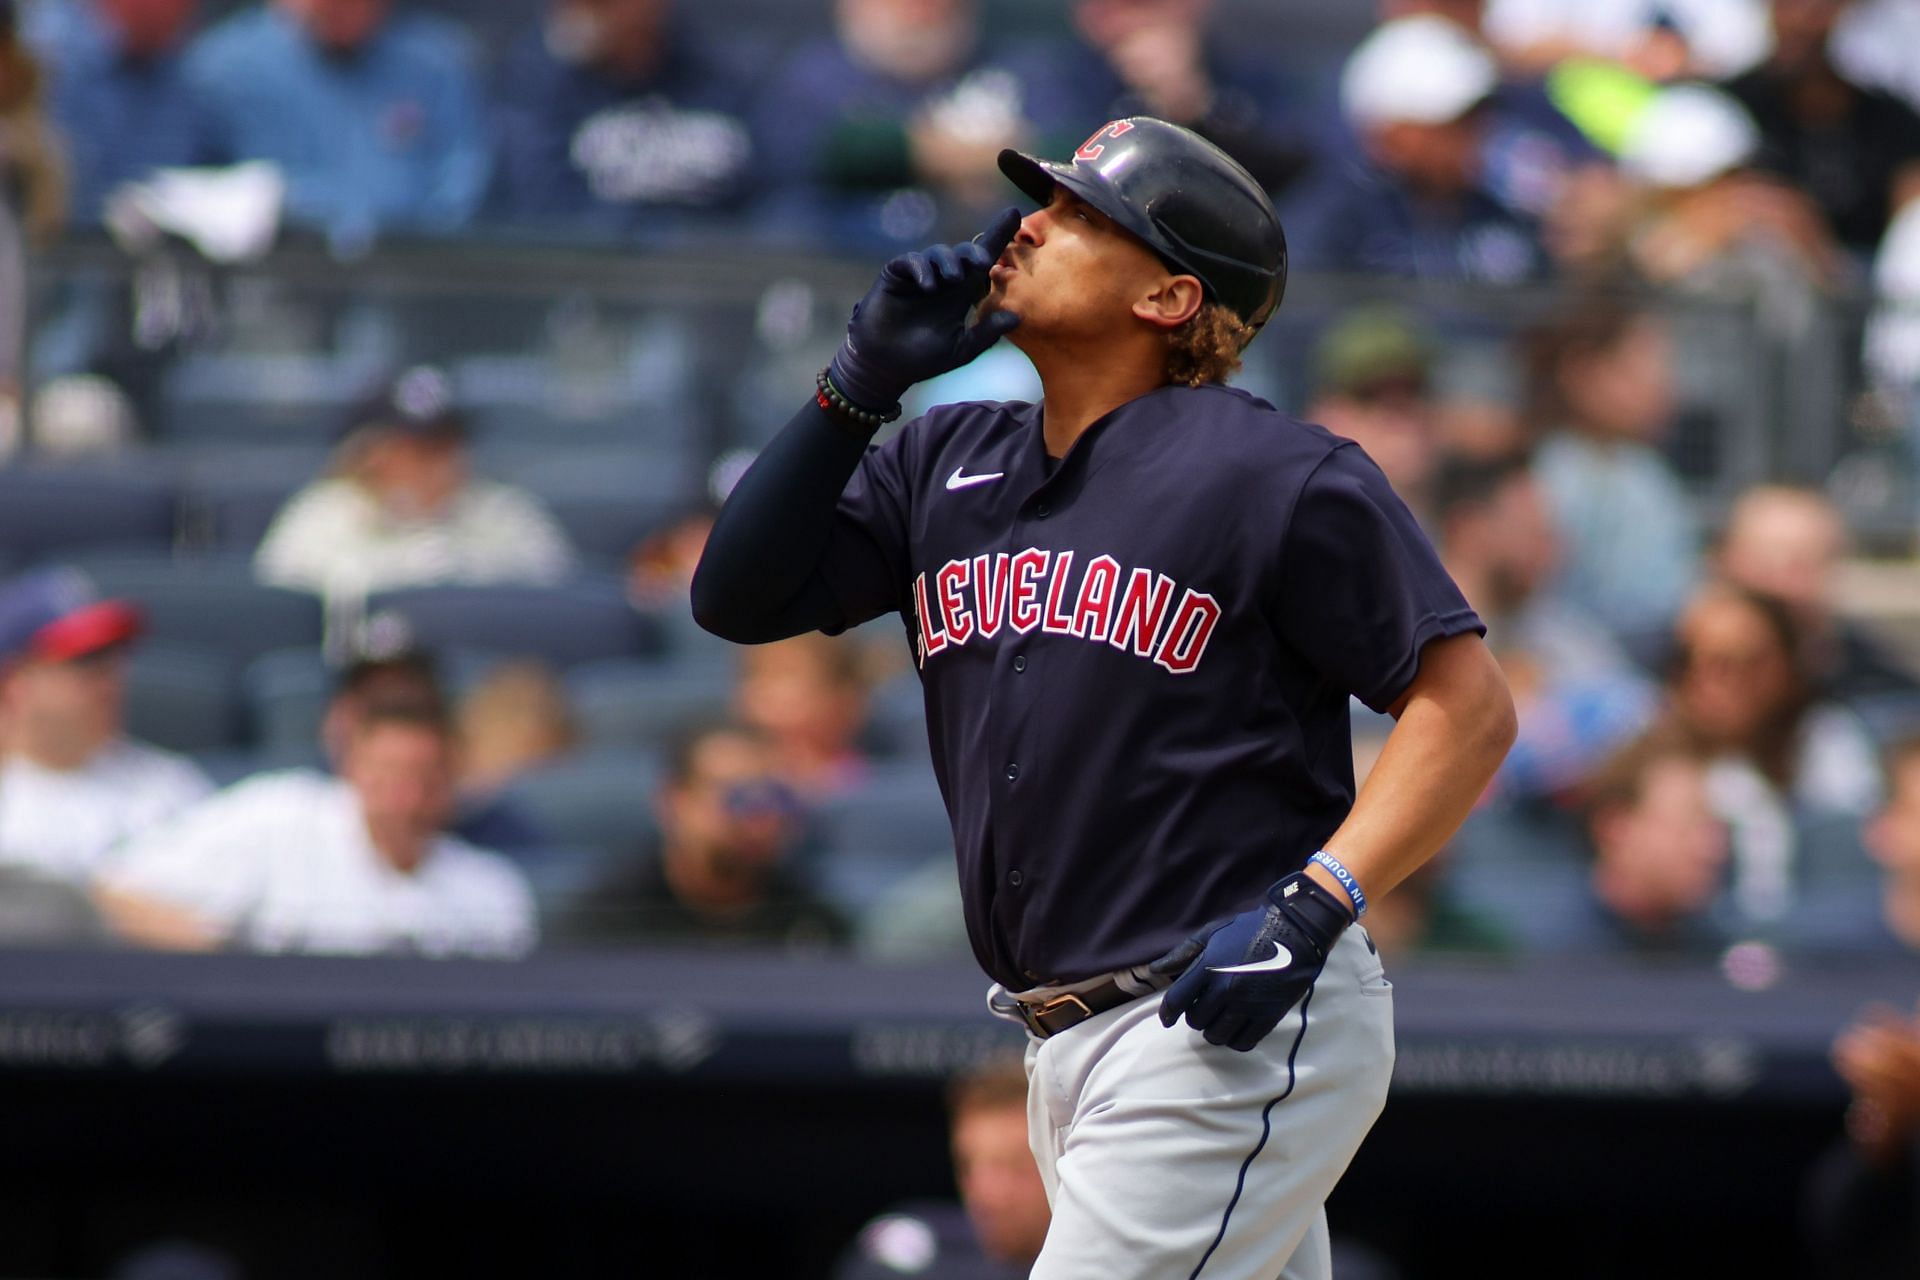 Cleveland outfielder Josh Naylor helped his team back into second place in the AL Central.